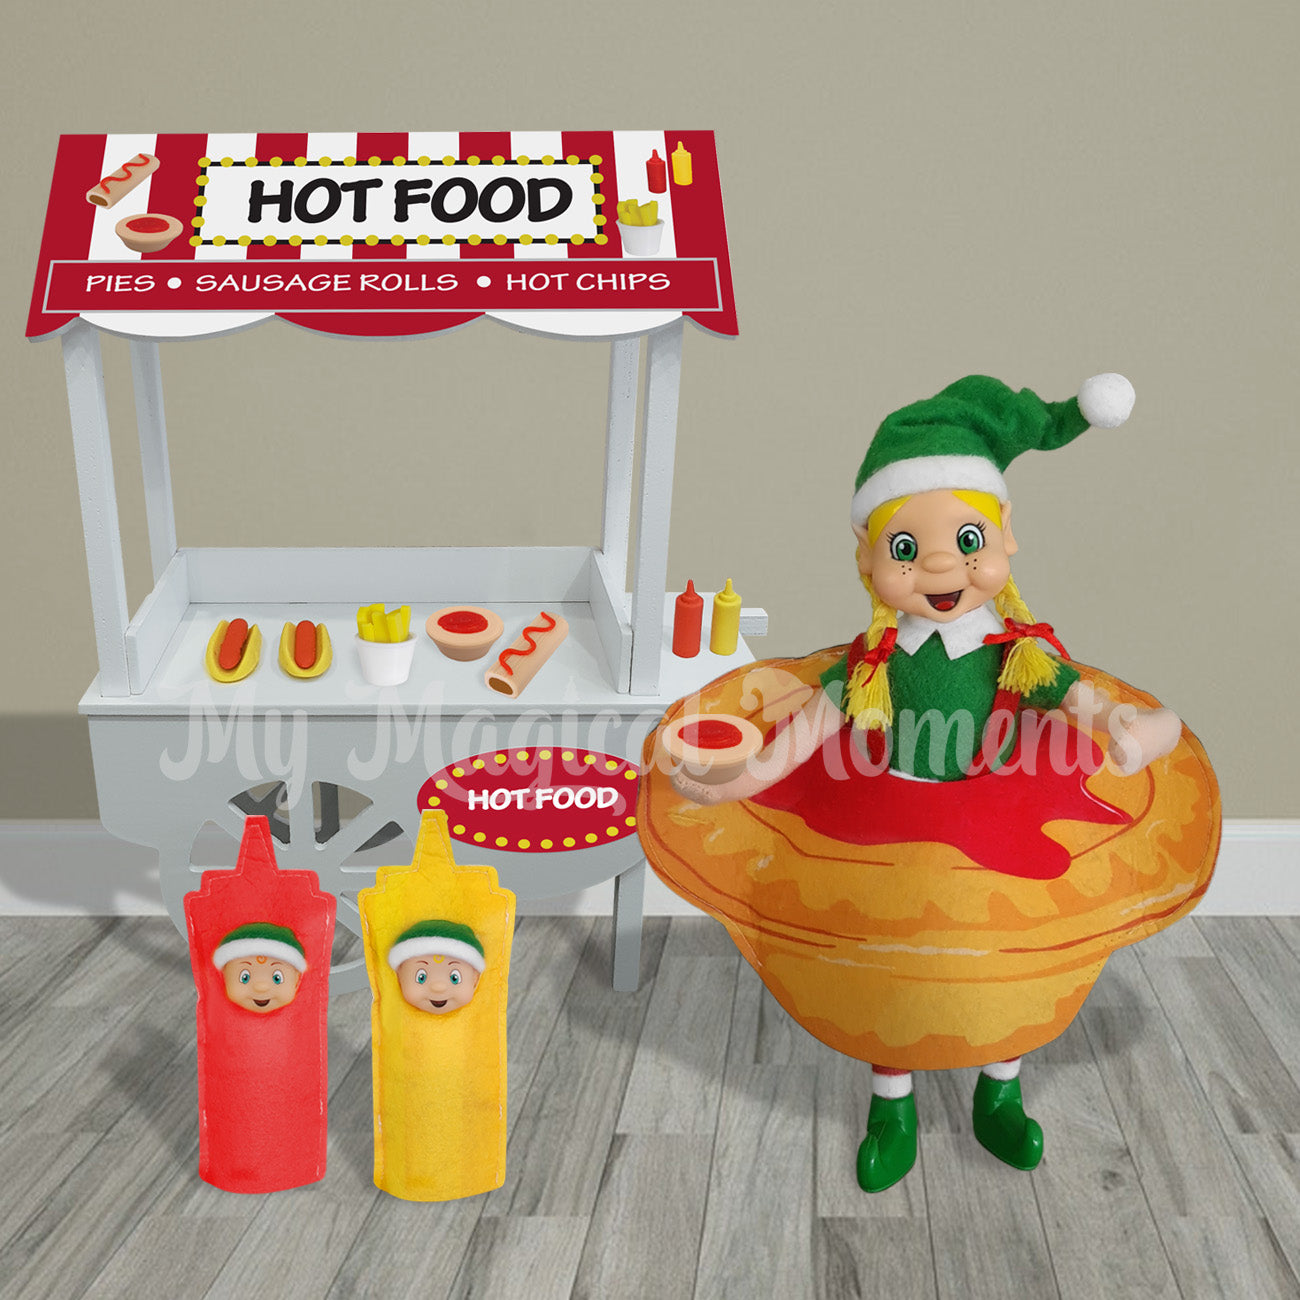 Elf scene hot food cart selling hot dogs, pies and hot chips. With an elf dressed as a pie holding a mini pie with sauce. Two toddlers are dressed as condiments